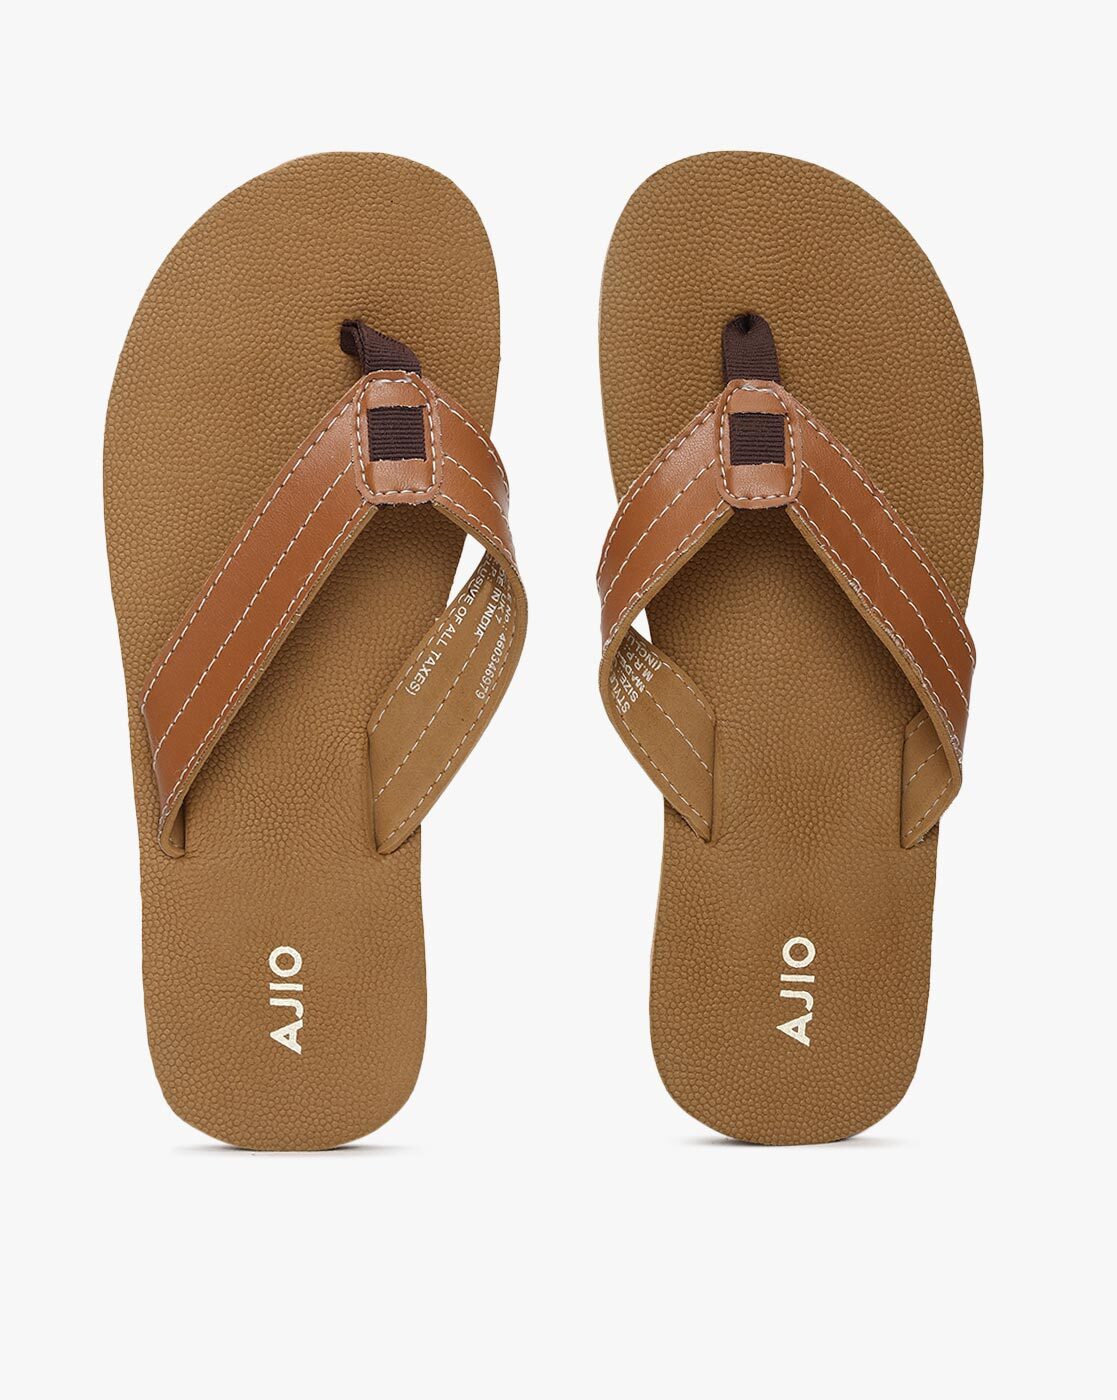 Buy Black Flip Flop & Slippers for Men by Forca by Lifestyle Online | Ajio .com-sgquangbinhtourist.com.vn